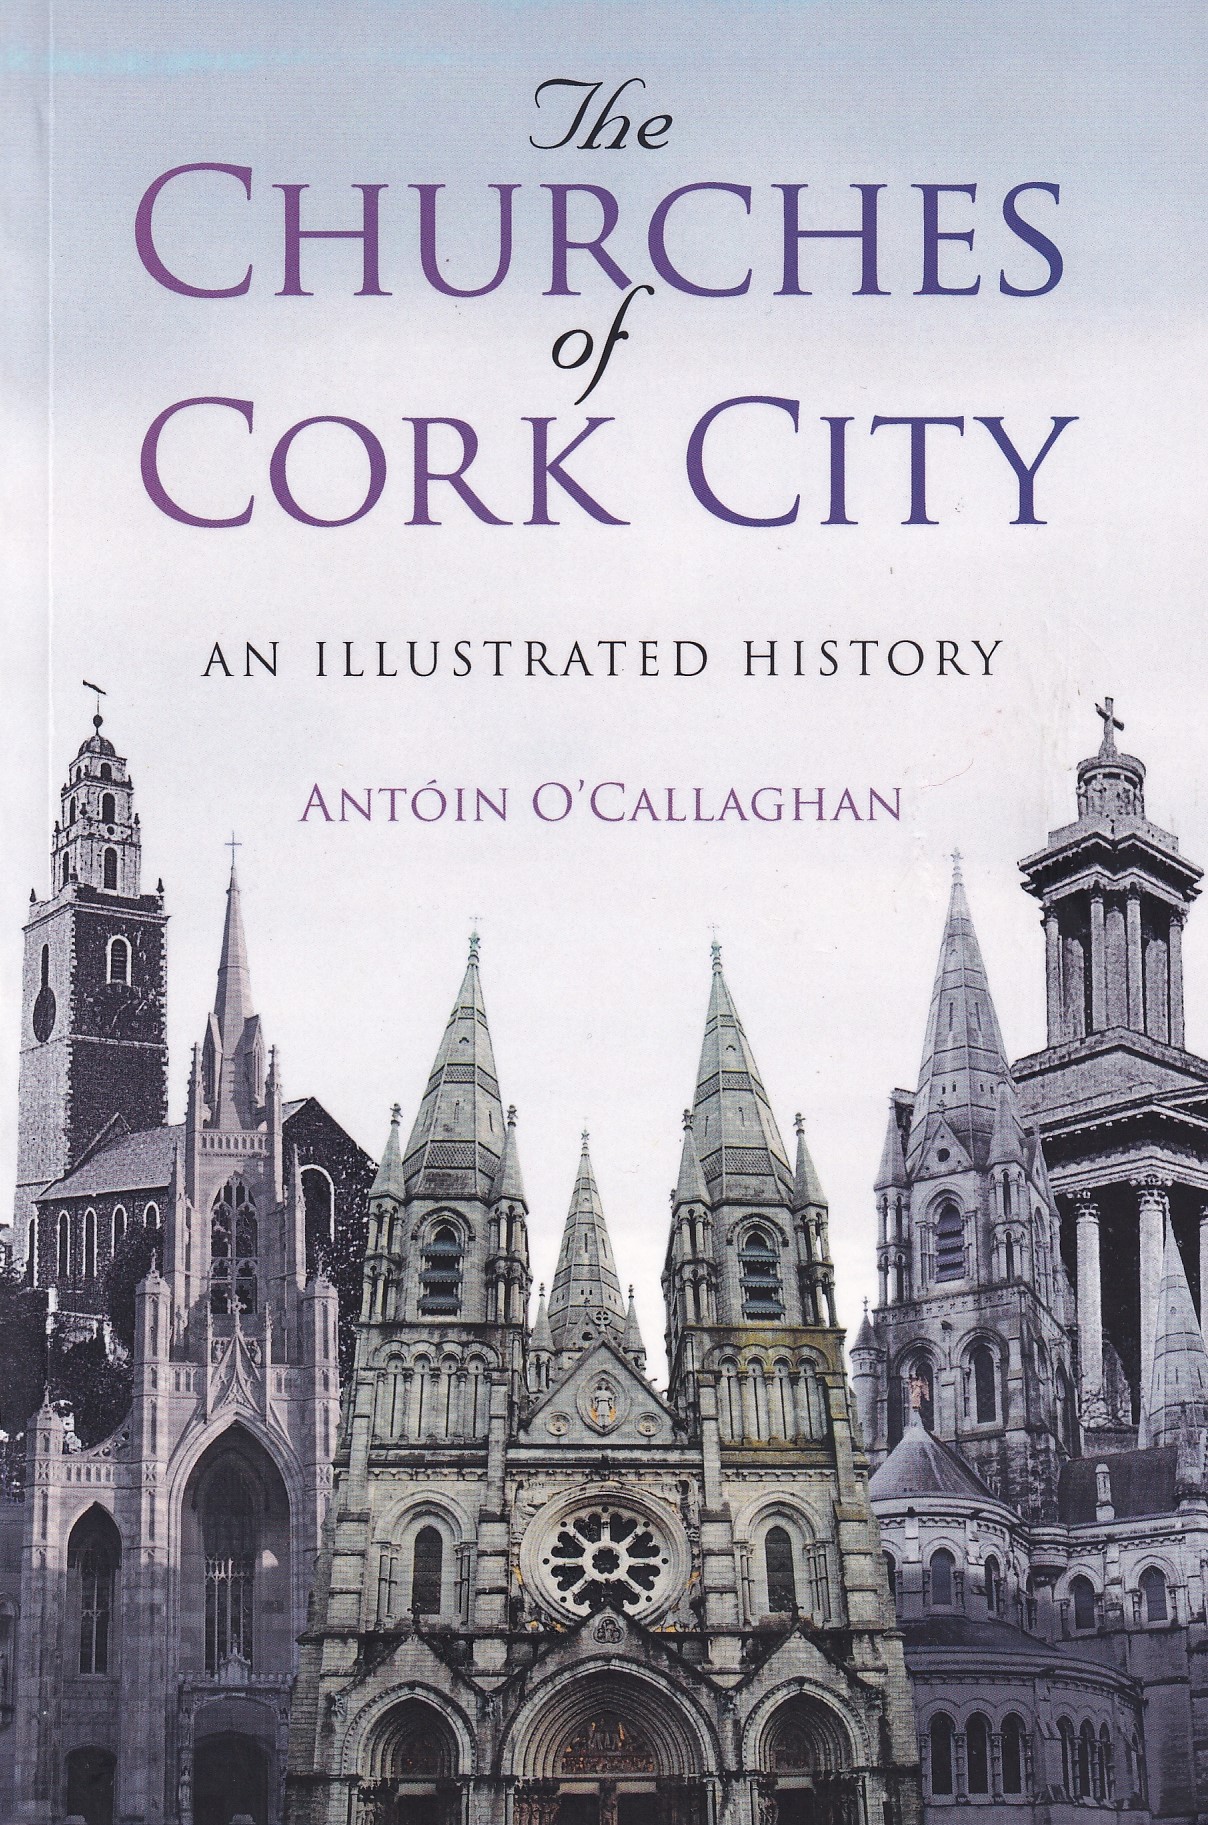 The Churches of Cork City: An Illustrated History | Antoin O'Callaghan | Charlie Byrne's